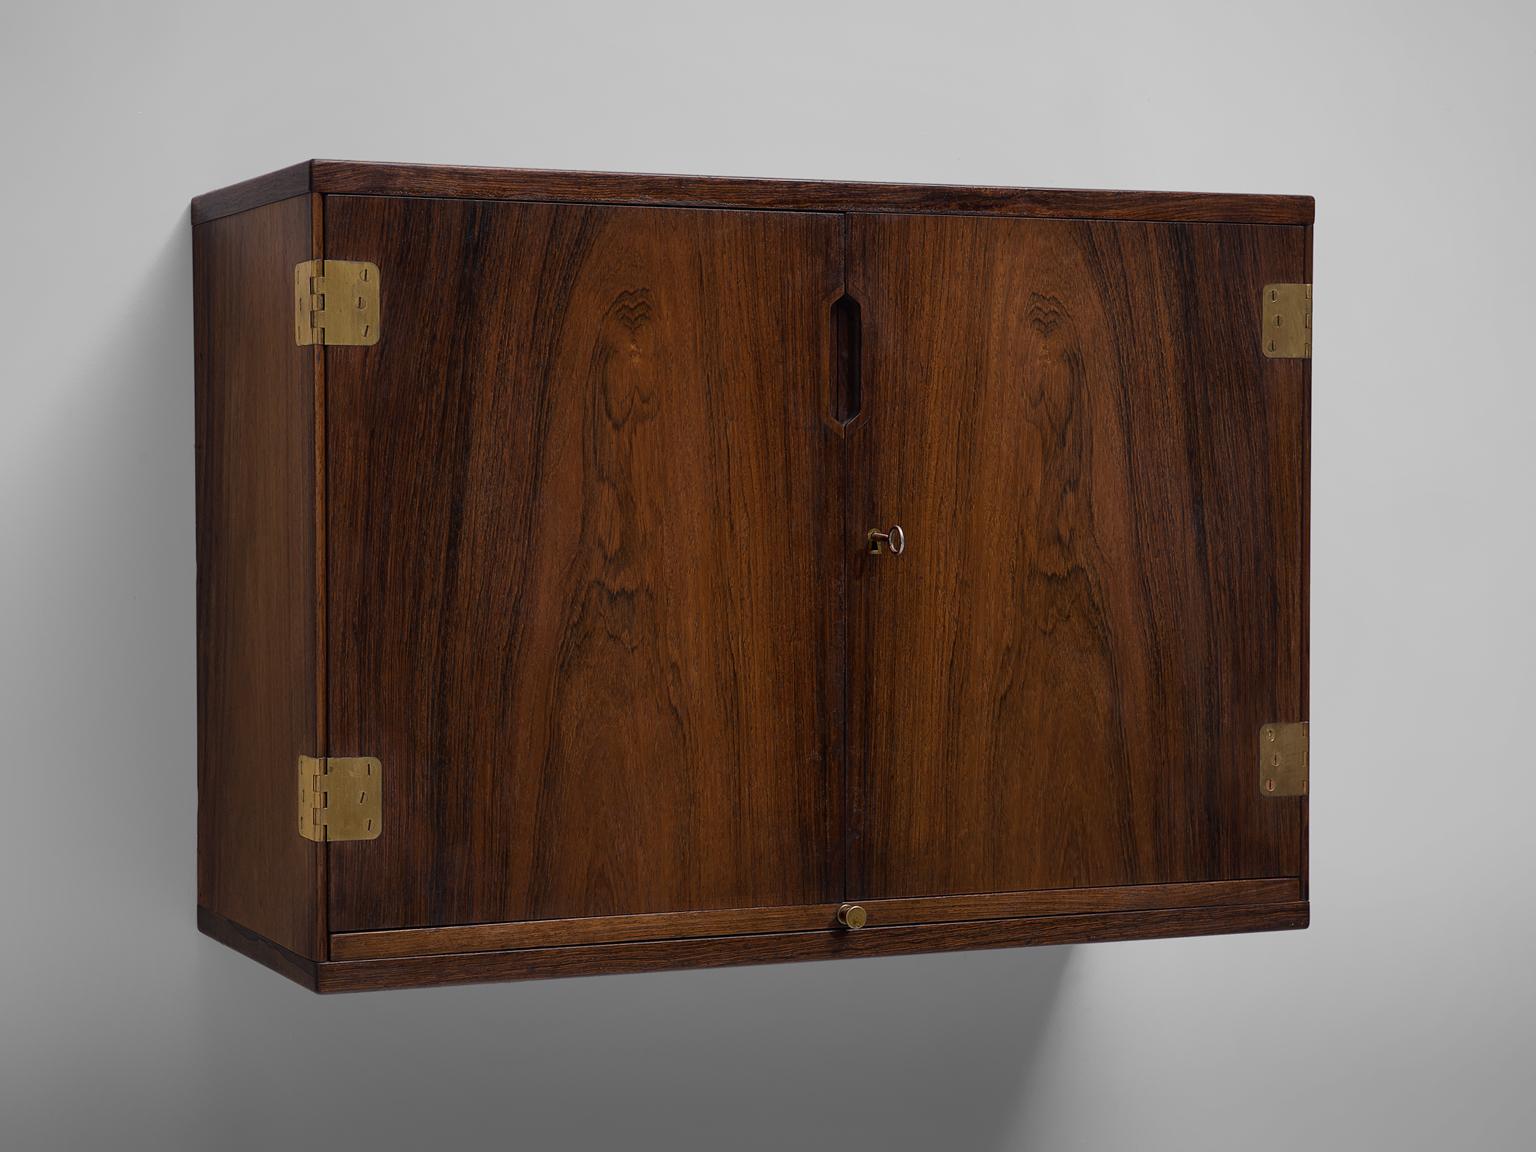 Svend Langkilde, wall-mounted bar cabinet, rosewood and brass, Denmark, 1960s.

This versatile bar cabinet designed by Svend Langkilde, features a beautiful rosewood grains. The book-matched rosewood doors open on fine brass hinges to two